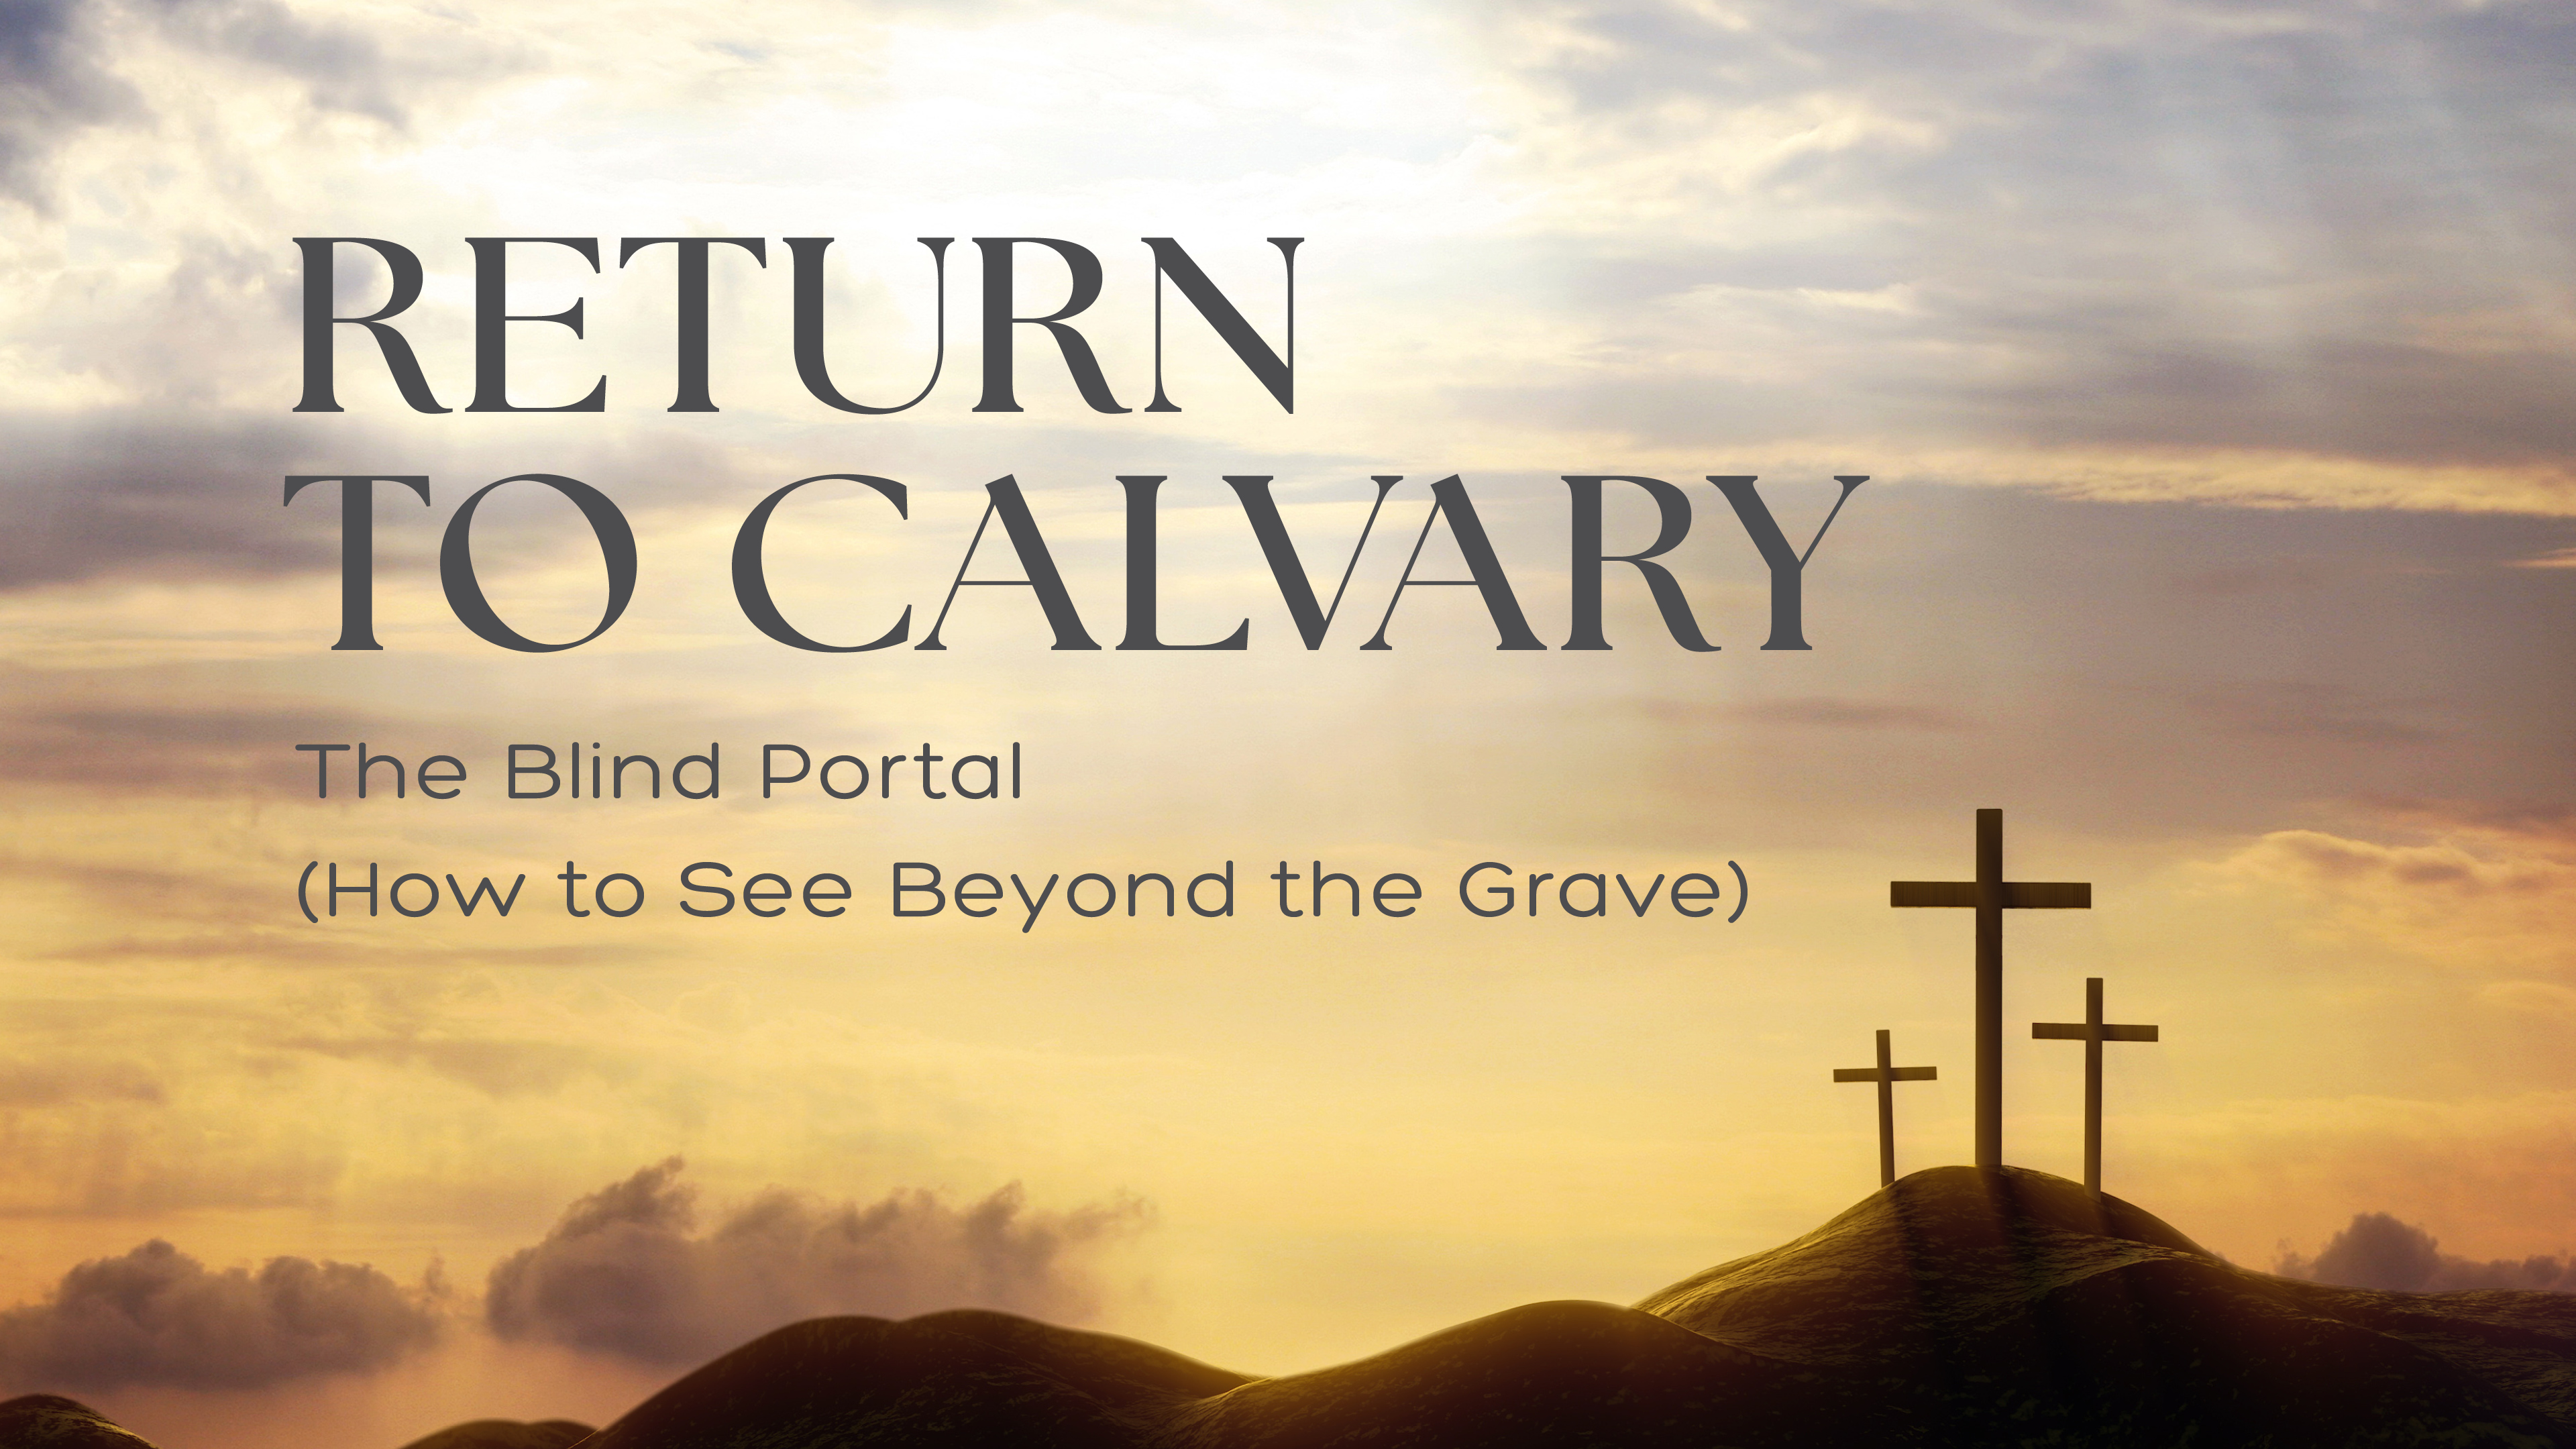 The Blind Portal (How to See Beyond the Grave)